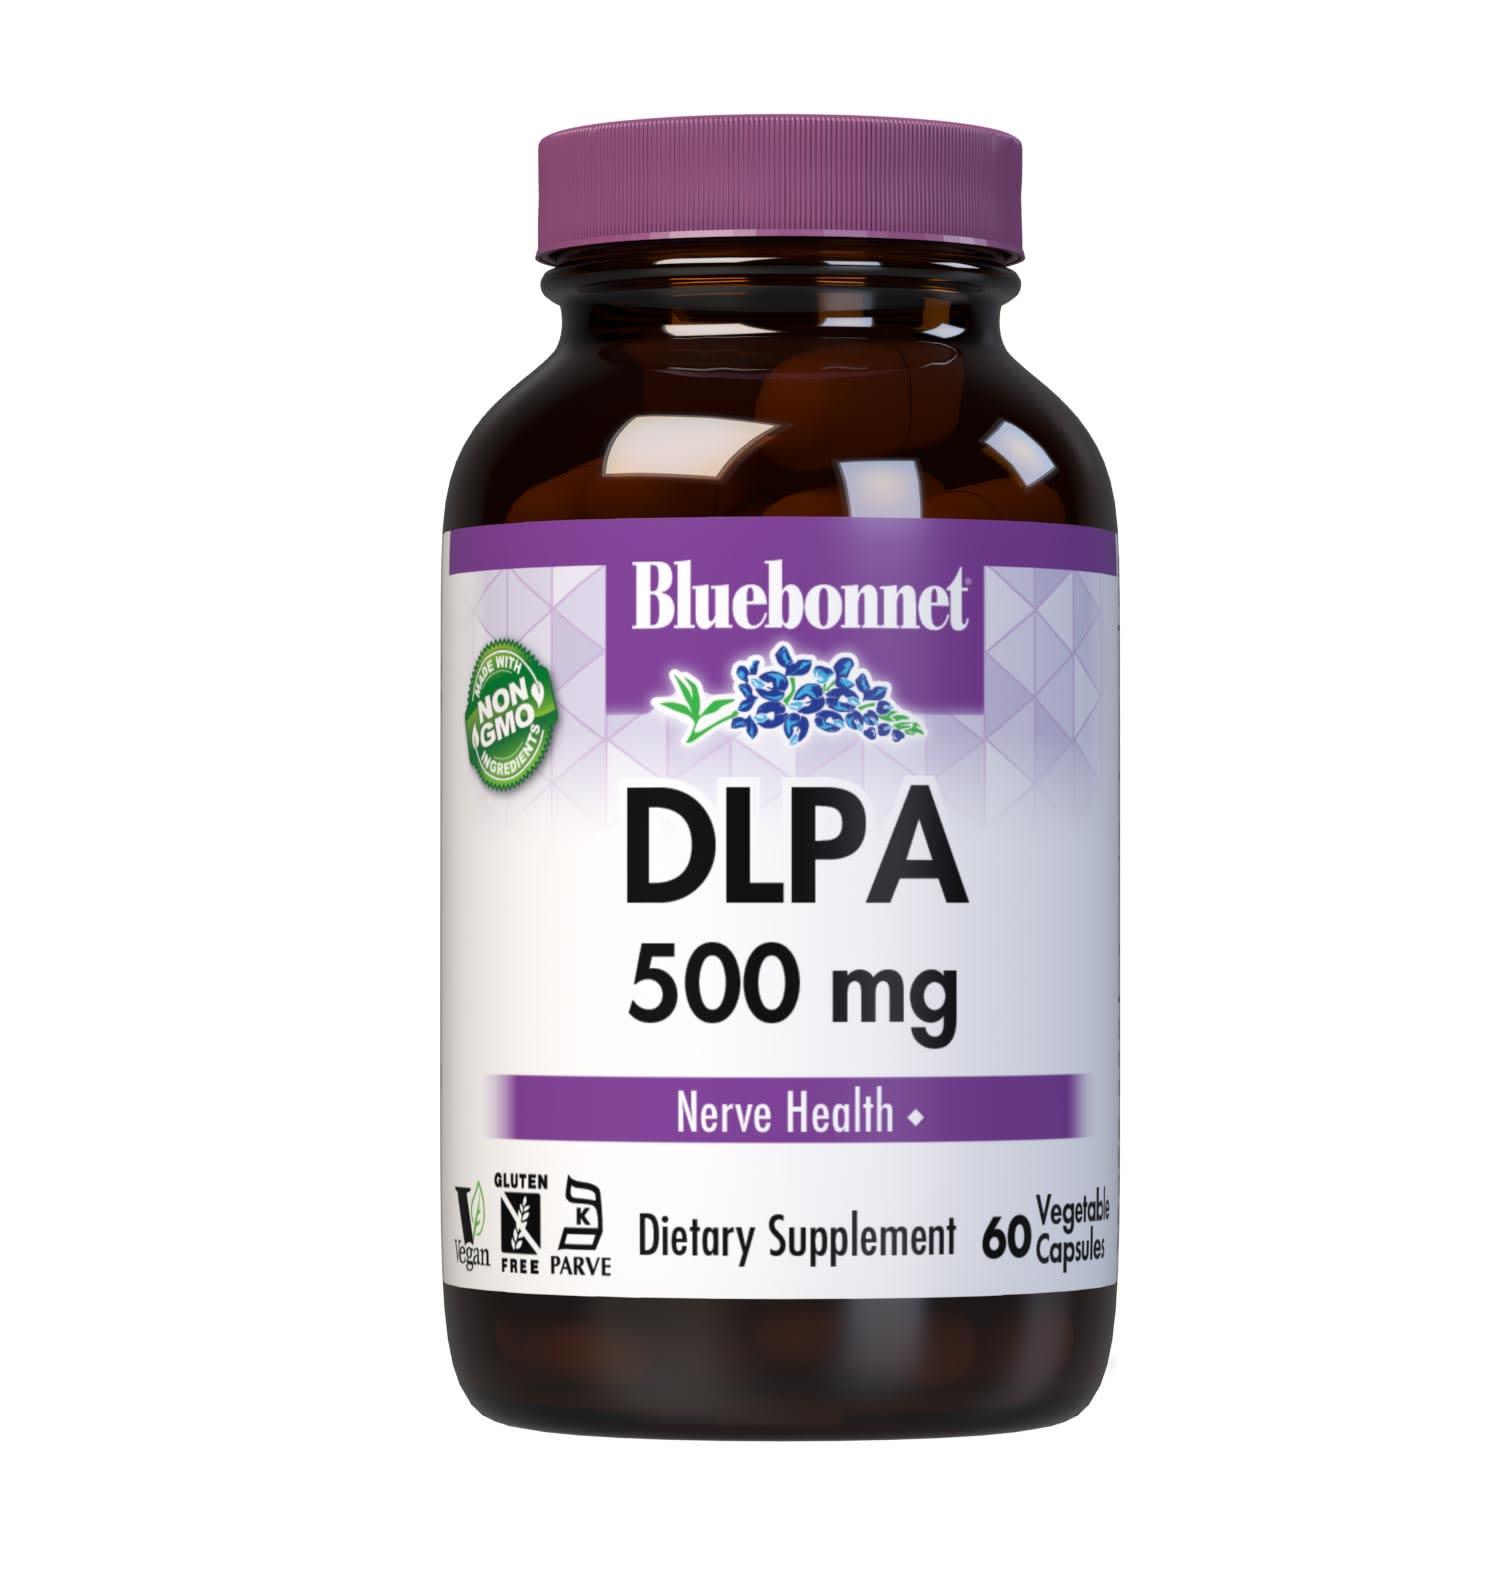 Bluebonnet’s DLPA 500 mg 60 Vegetable Capsules are formulated with free-form amino acid DL-phenylalanine in its crystalline form to support nerve health. #size_60 count